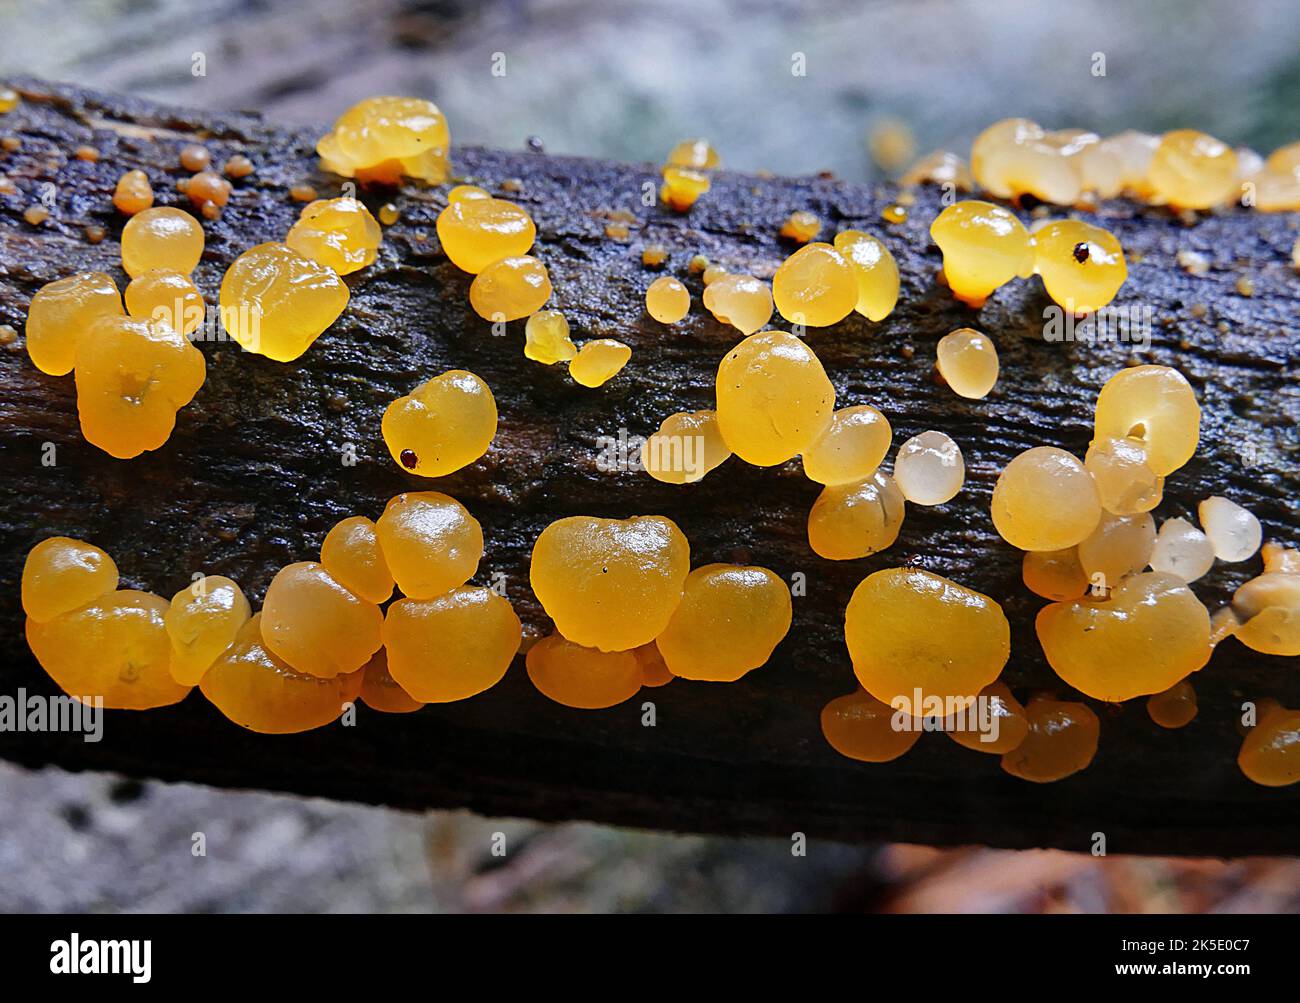 Guepiniopsis alpina, commonly known as the jelly cup, alpine jelly cone, or poor man's gumdrop, is a species of fungus in the family Dacrymycetaceae. The small, gelatinous Fruit bodies are orange and cone or cup shaped. Stock Photo